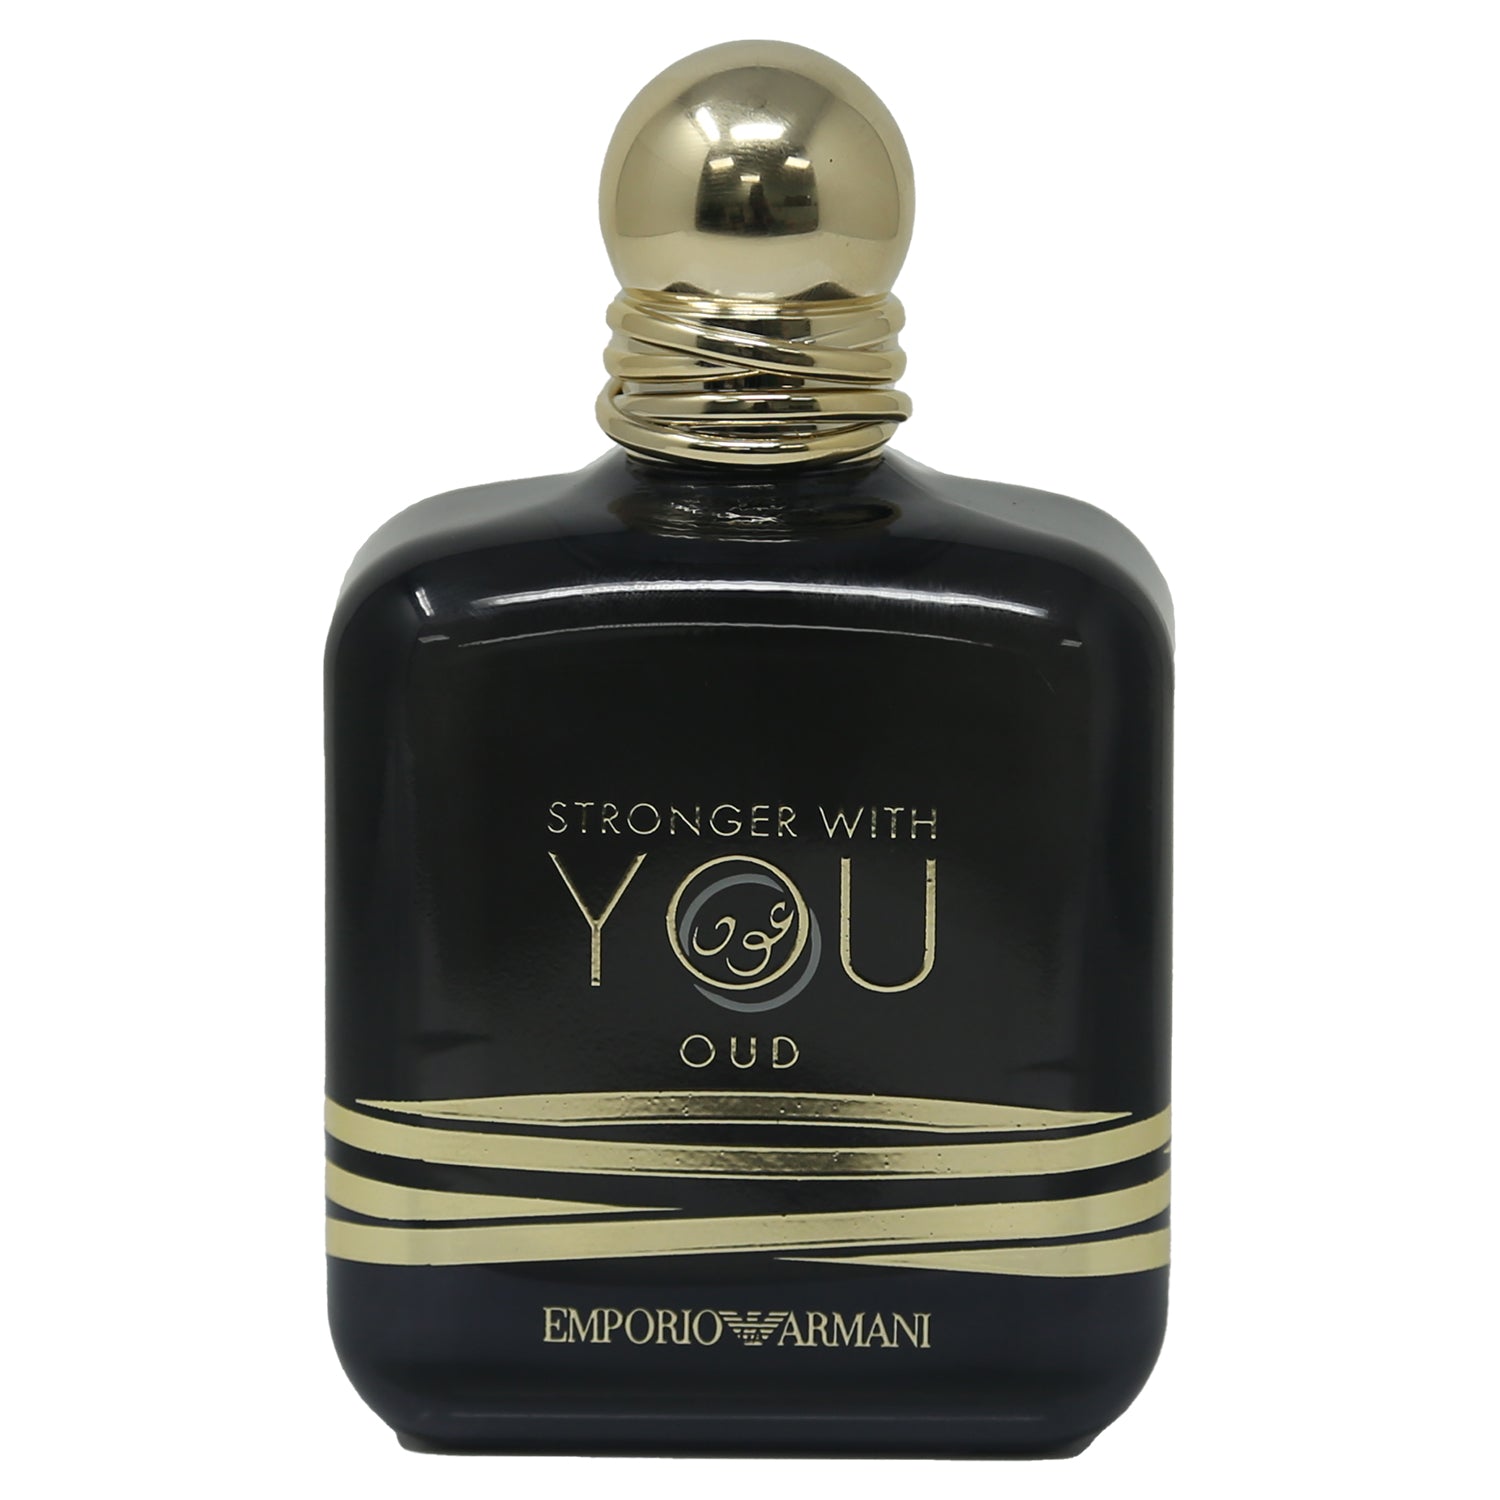 Armani Stronger With You Discovery set - 4x2ml